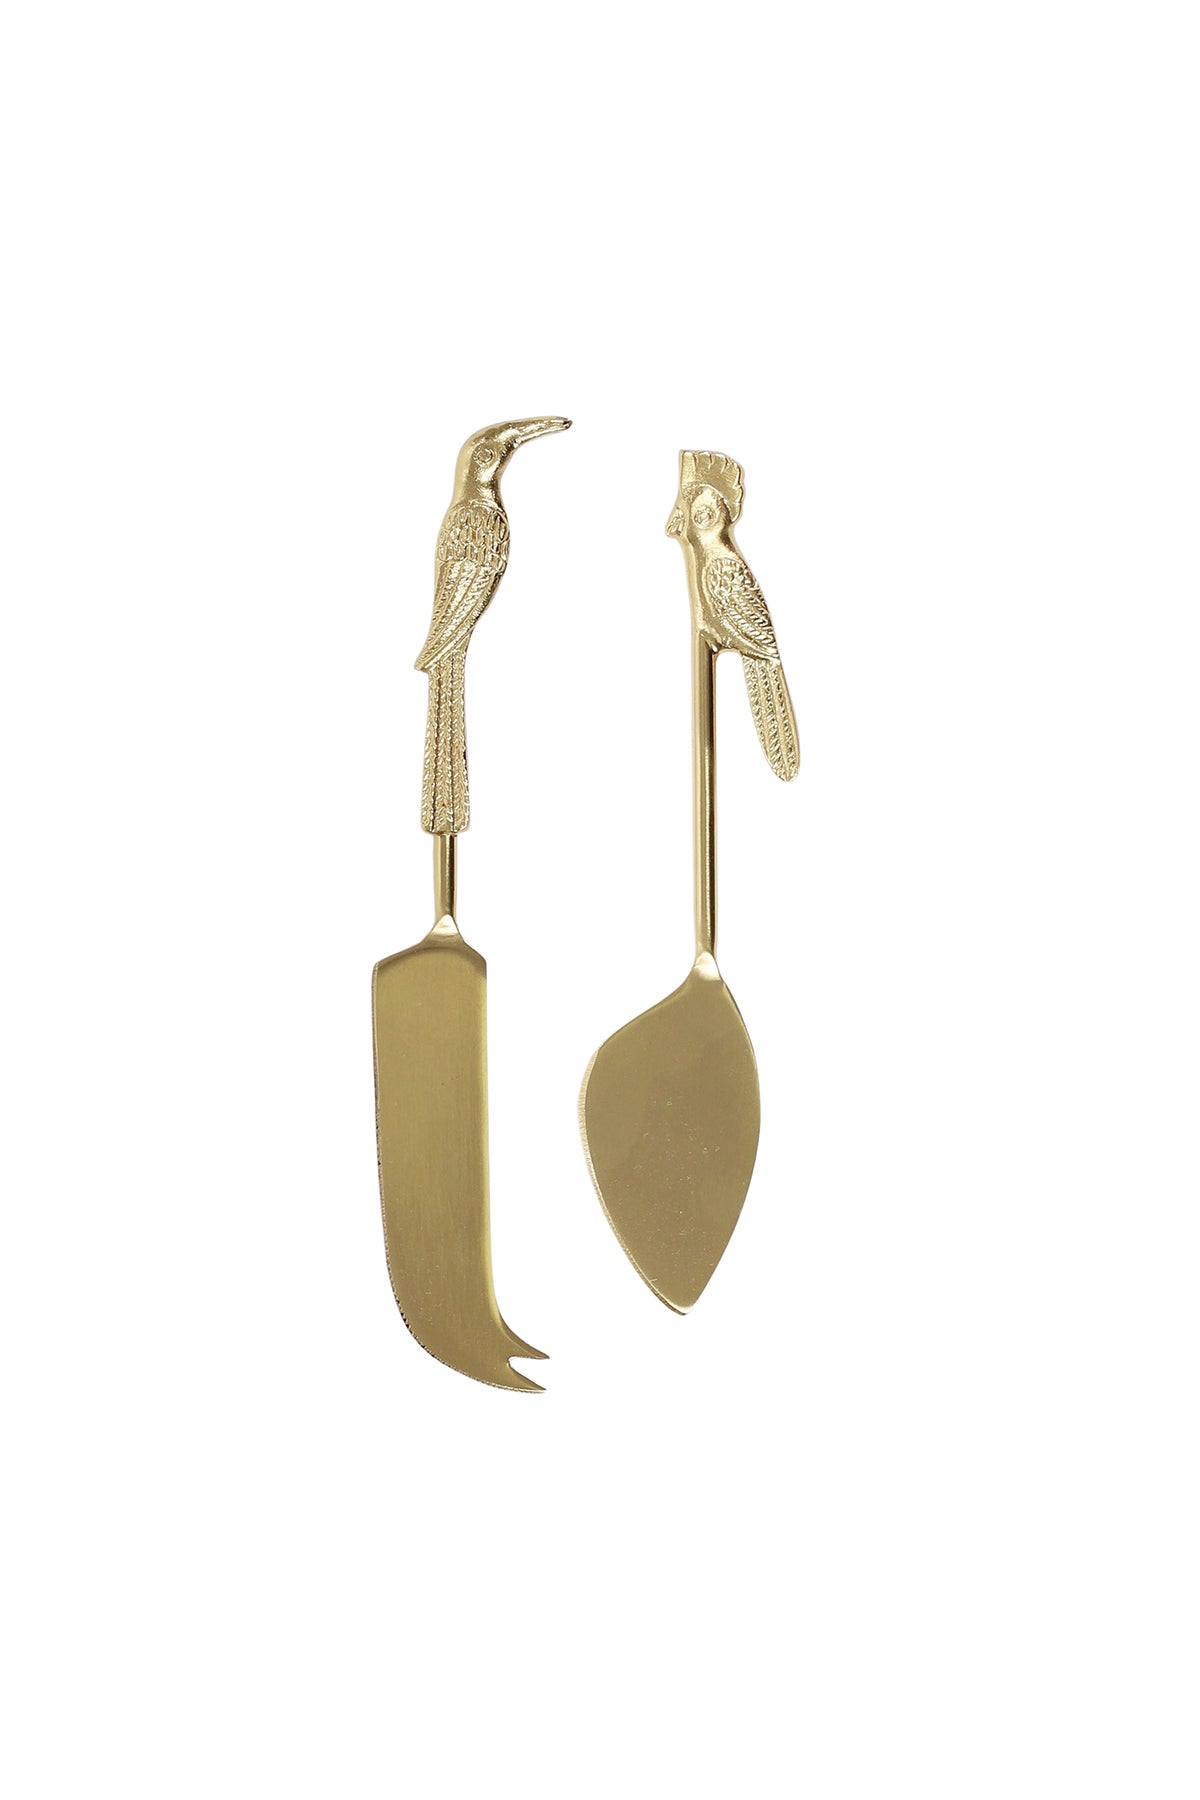 Parrot Brass Cheese Knives